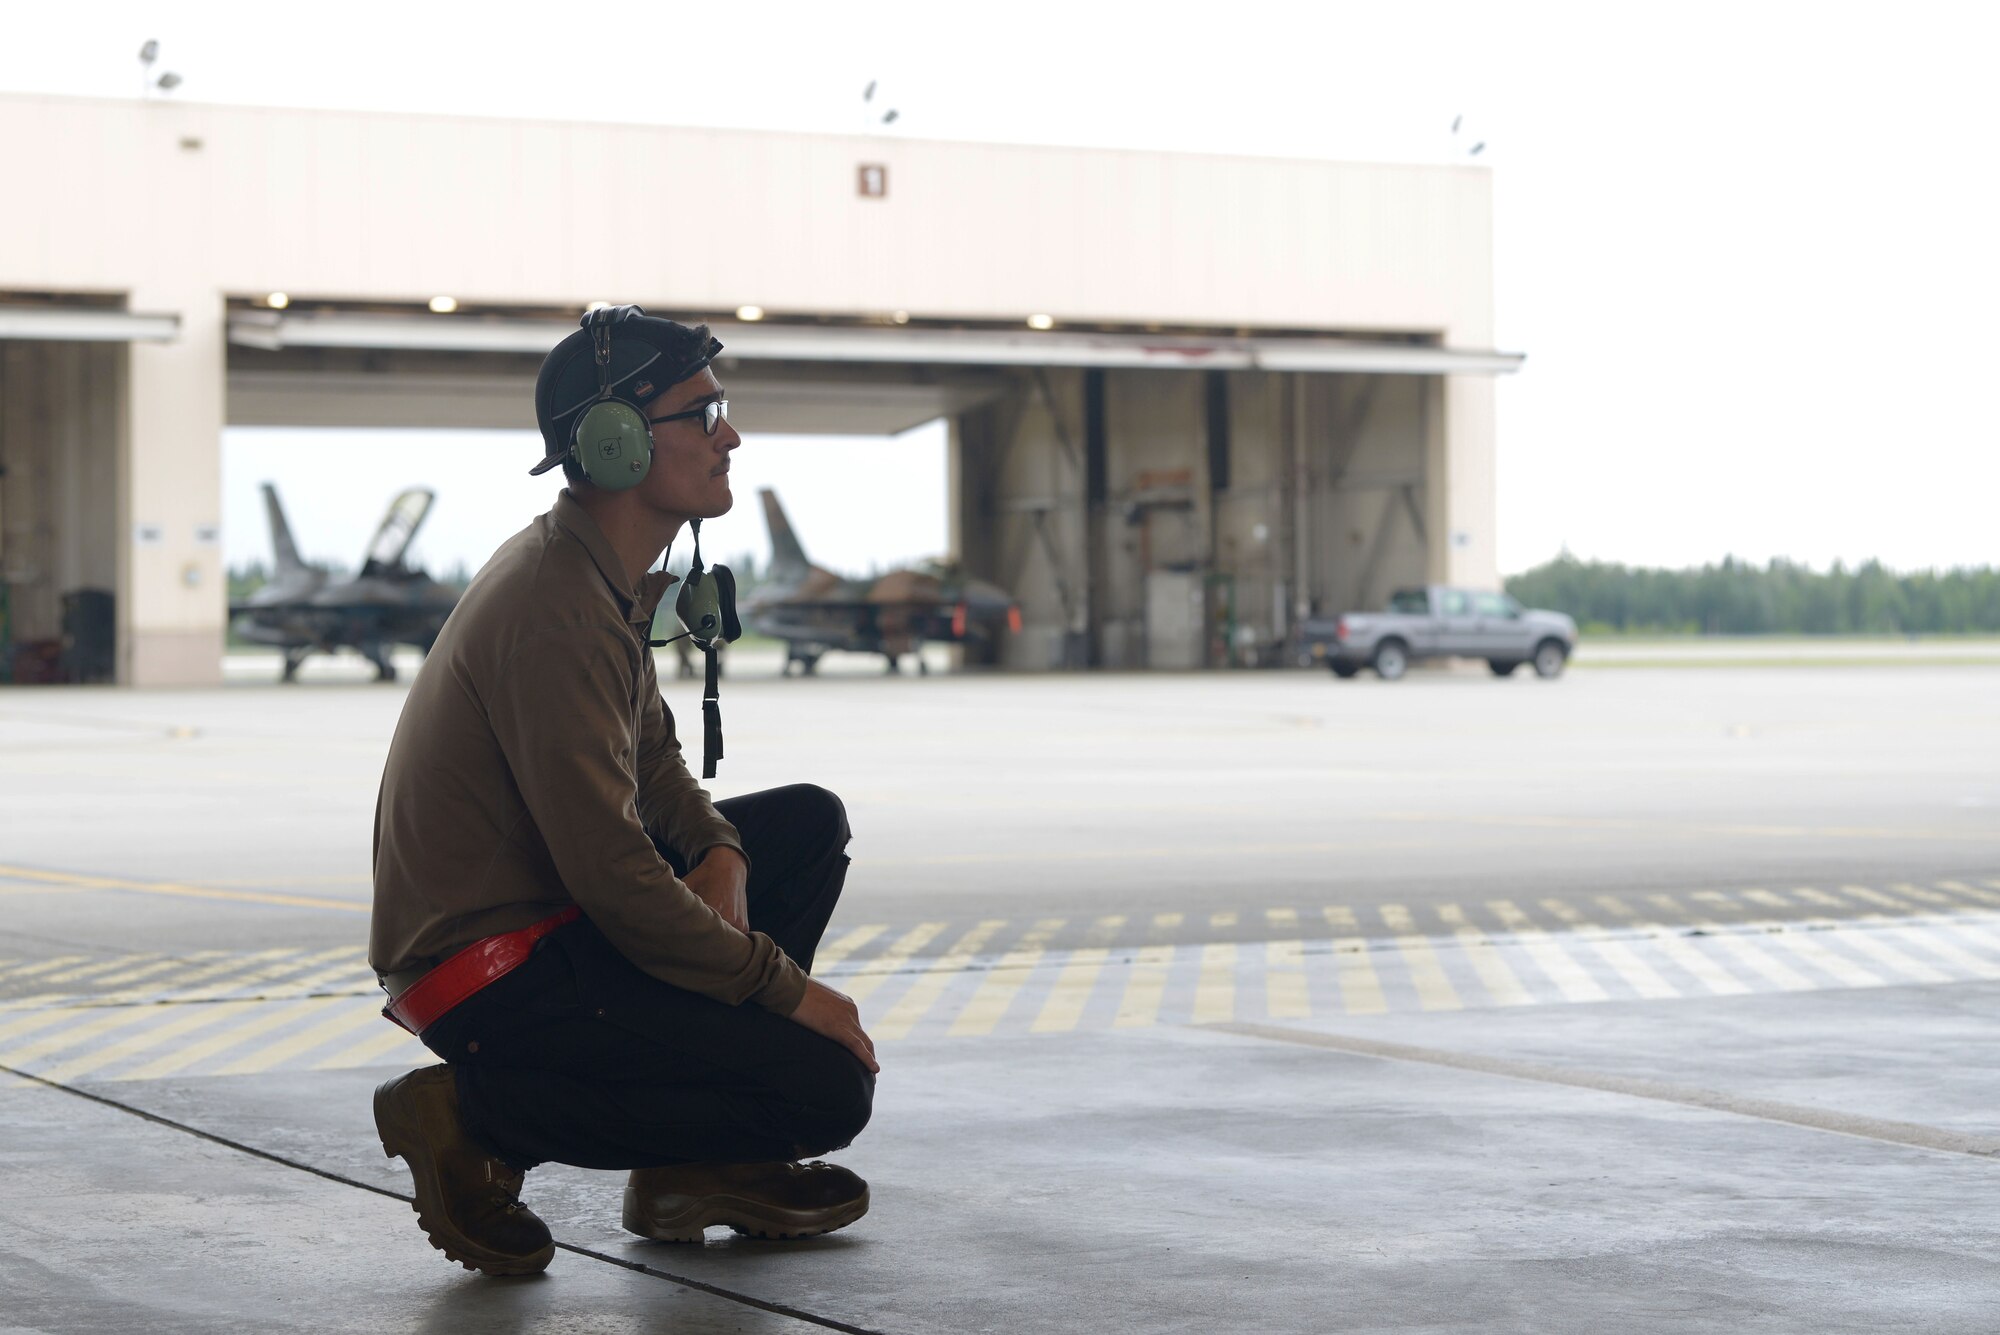 U.S. Air Force Airman 1st Class Jacob Camacho, an 18th Aircraft Maintenance Unit (AMU) crew chief, conducts preflight checks on an F-16 Fighting Falcon aircraft during RED FLAG-Alaska 20-3 on Eielson Air Force Base, Alaska, Aug. 4, 2020. Aircraft maintainers perform pre-, post- and between-flight safety and function checks, ensuring aircraft are mission-ready at a moment’s notice. (U.S. Air Force photo by Senior Airman Beaux Hebert)